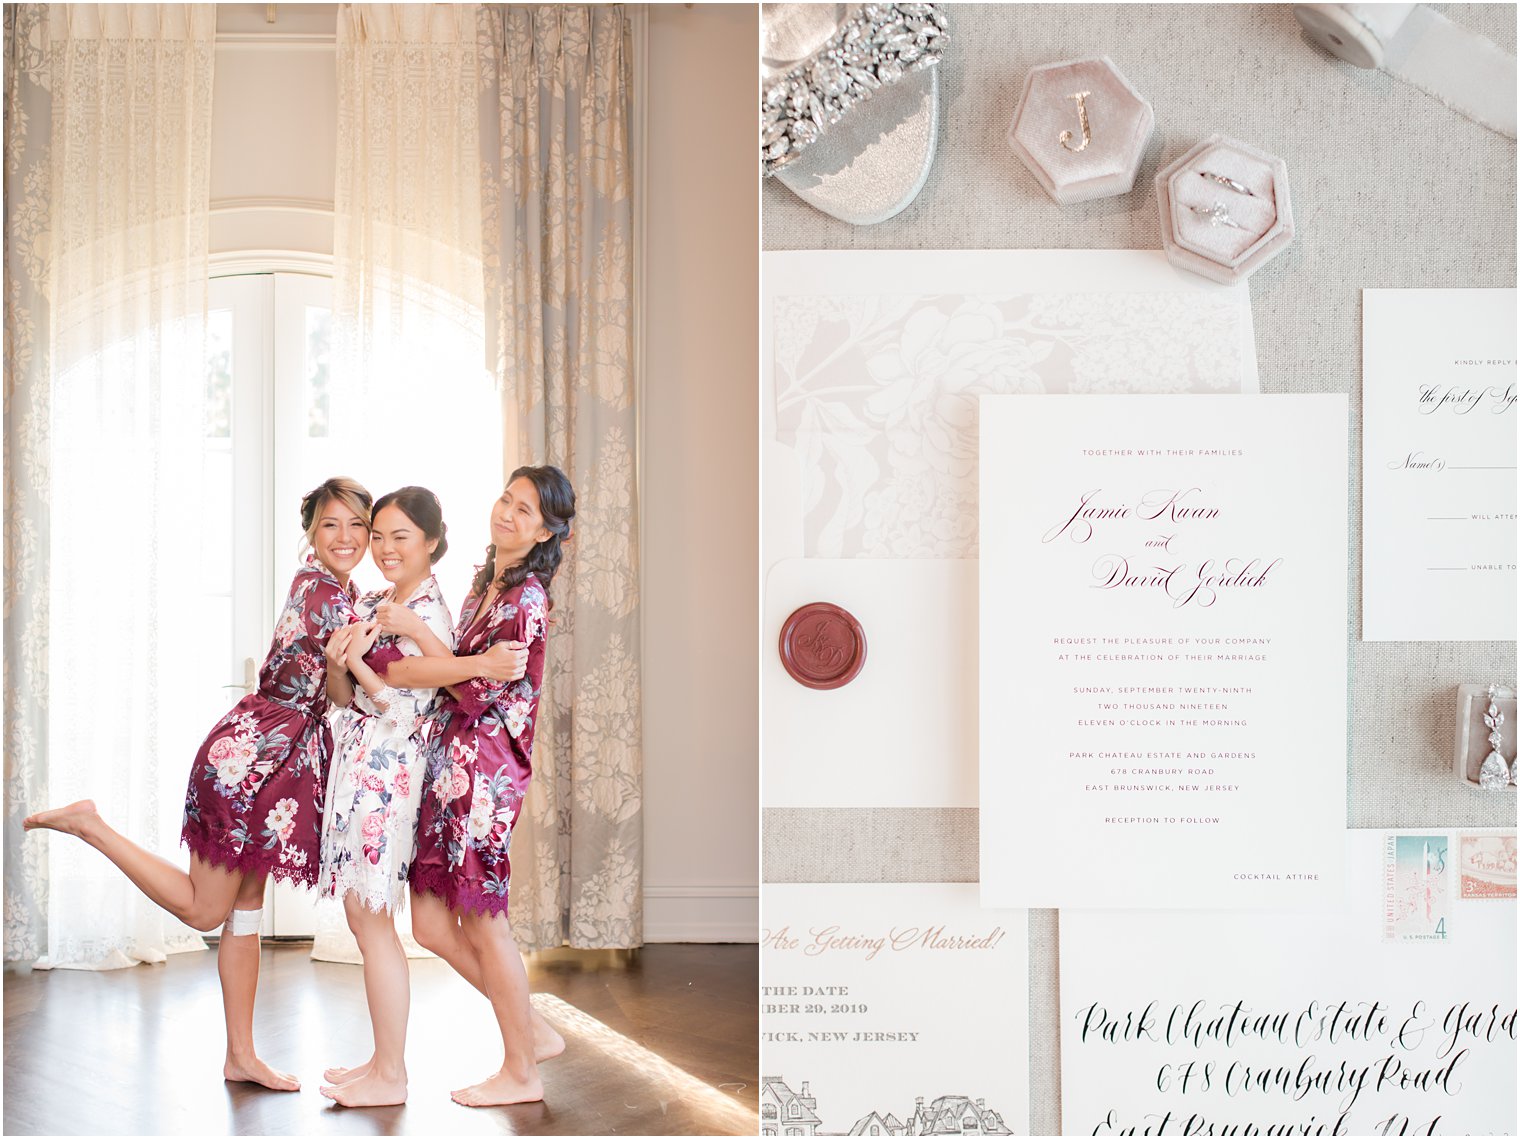 wedding invitations for New Jersey wedding photographed by Idalia Photography